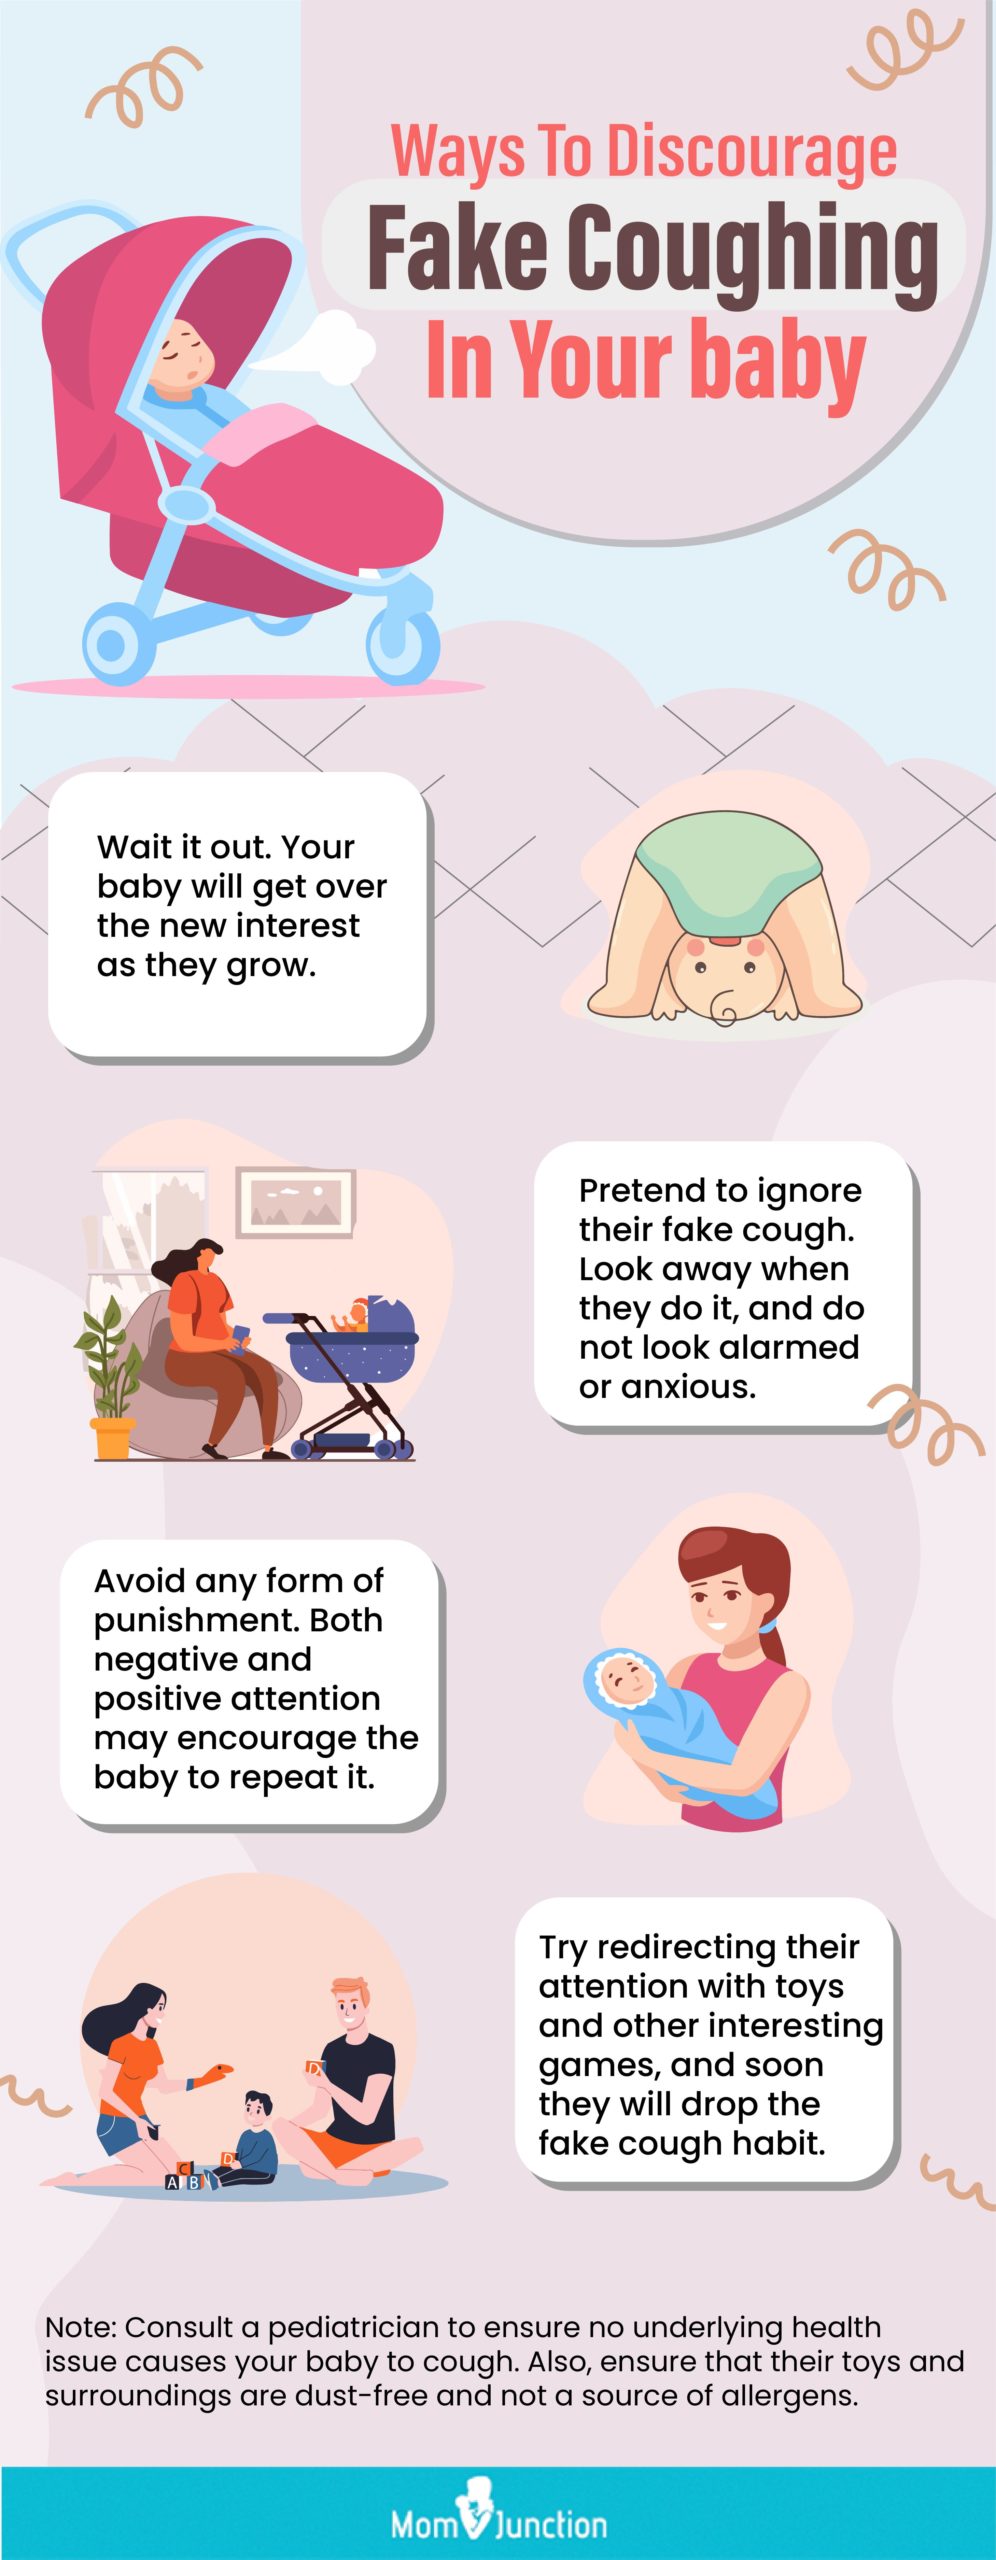 ways to discourage fake coughing in your baby [infographic]